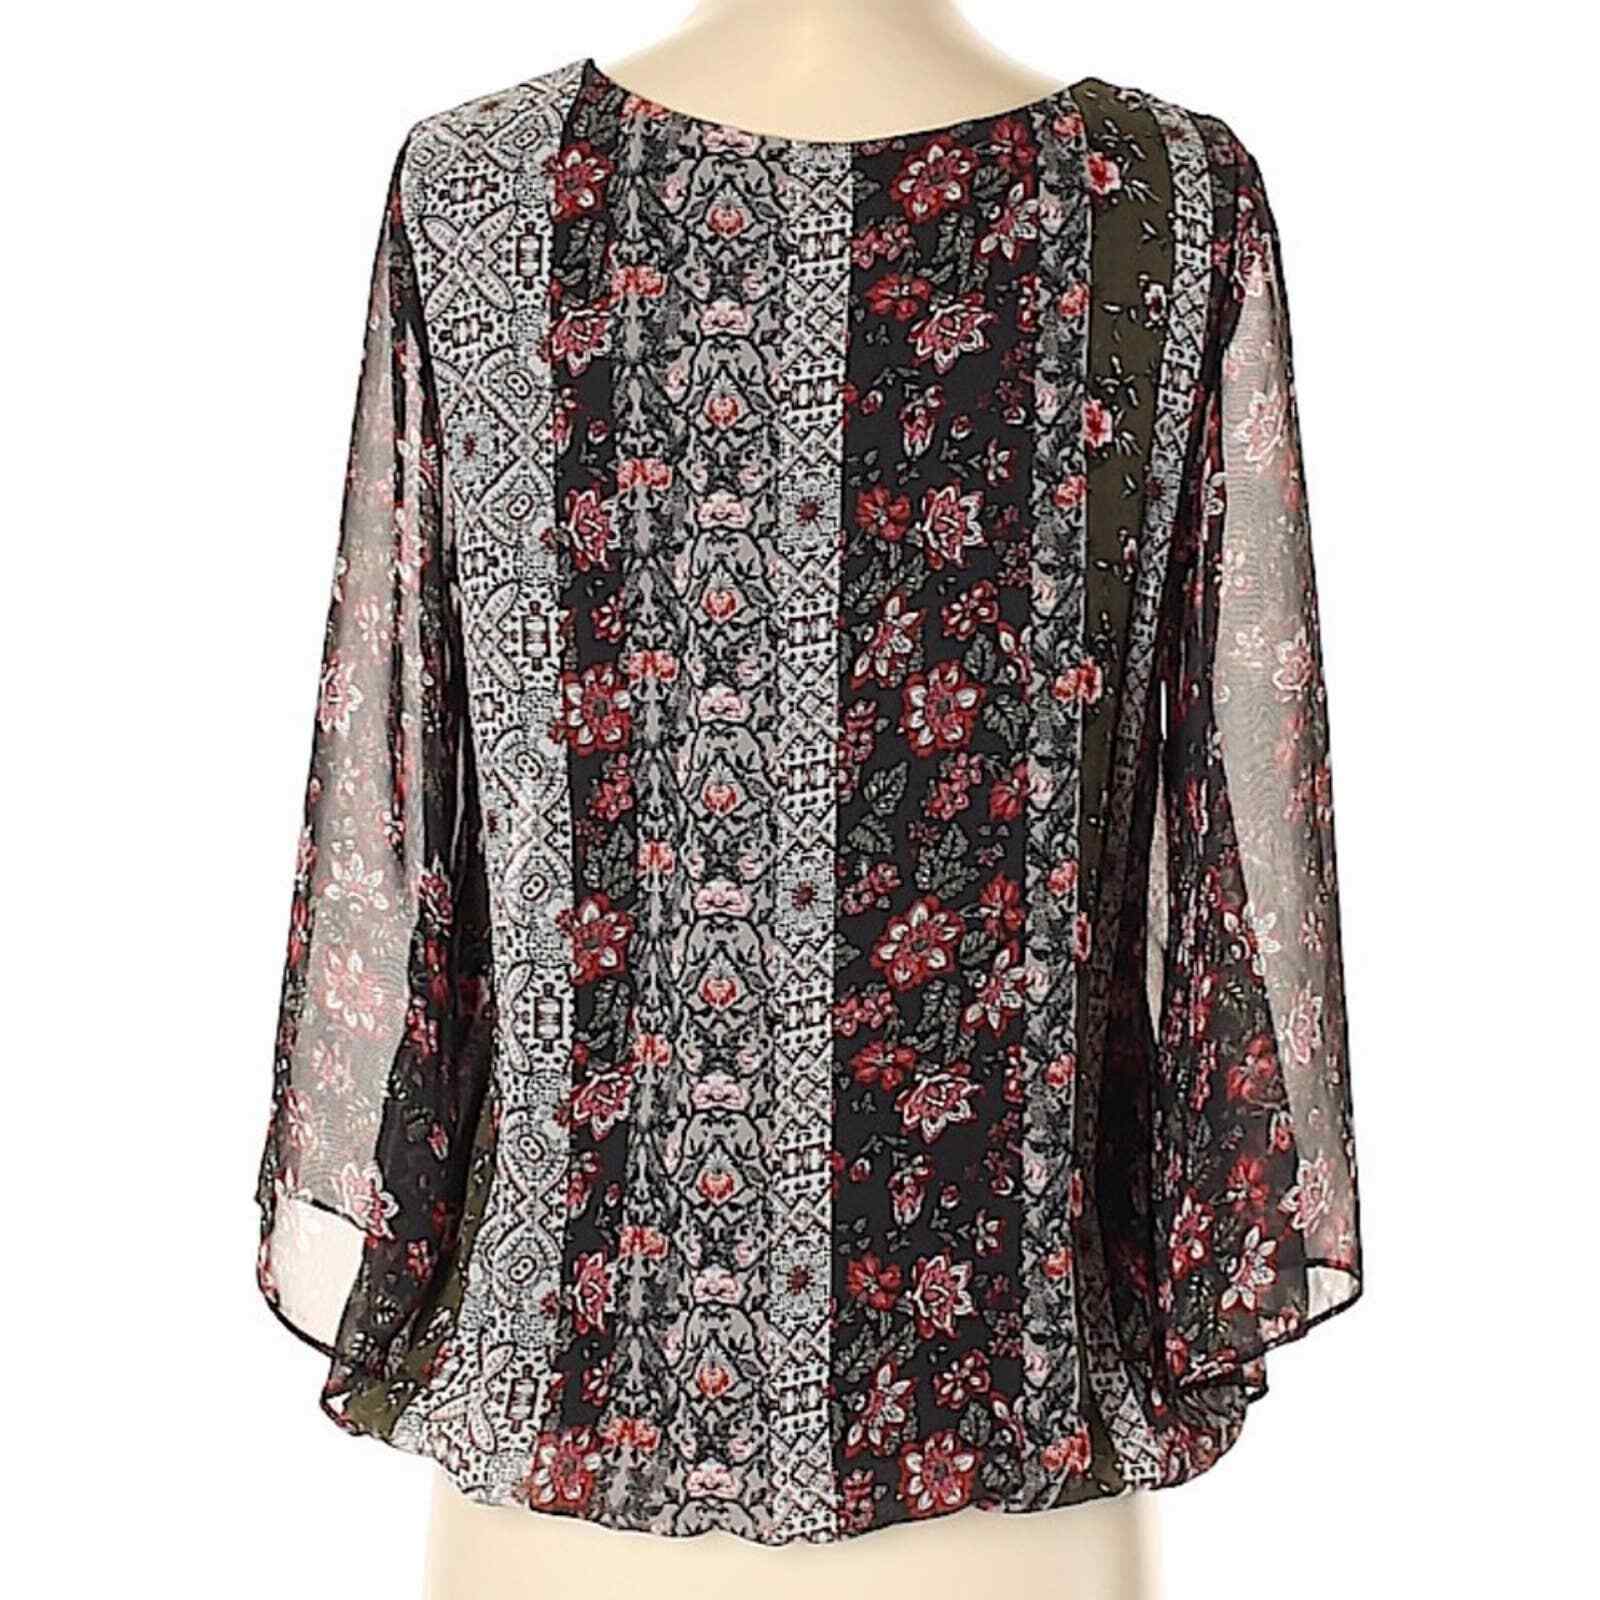 New Directions Boho Chiffon Floral Blouse - image 10